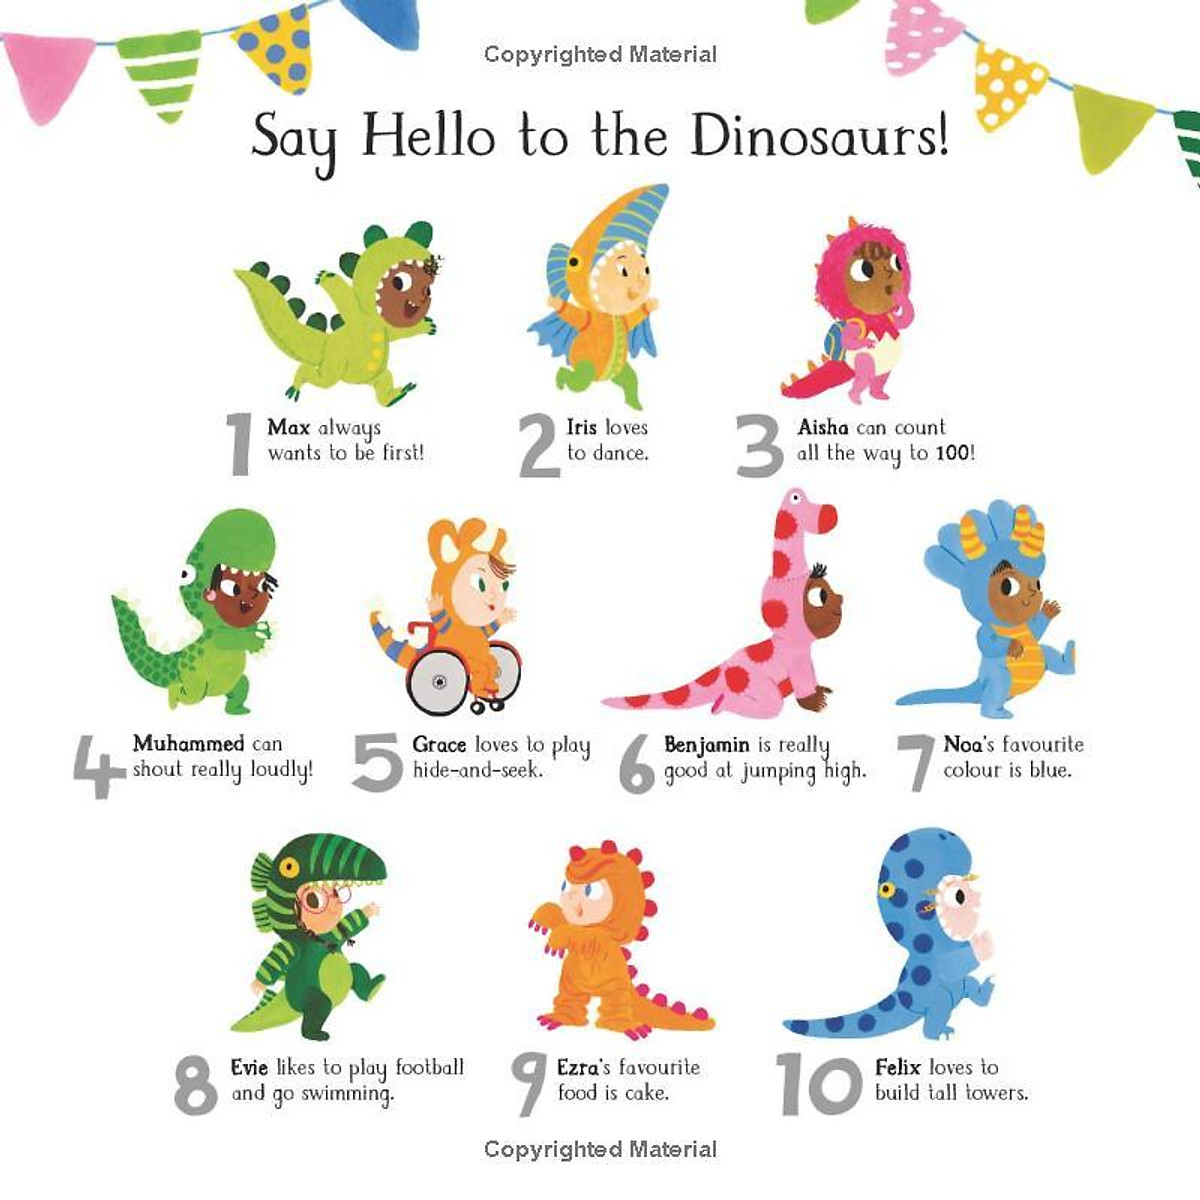 This Little Dinosaur : A Roarsome Twist On The Classic Nursery Rhyme!